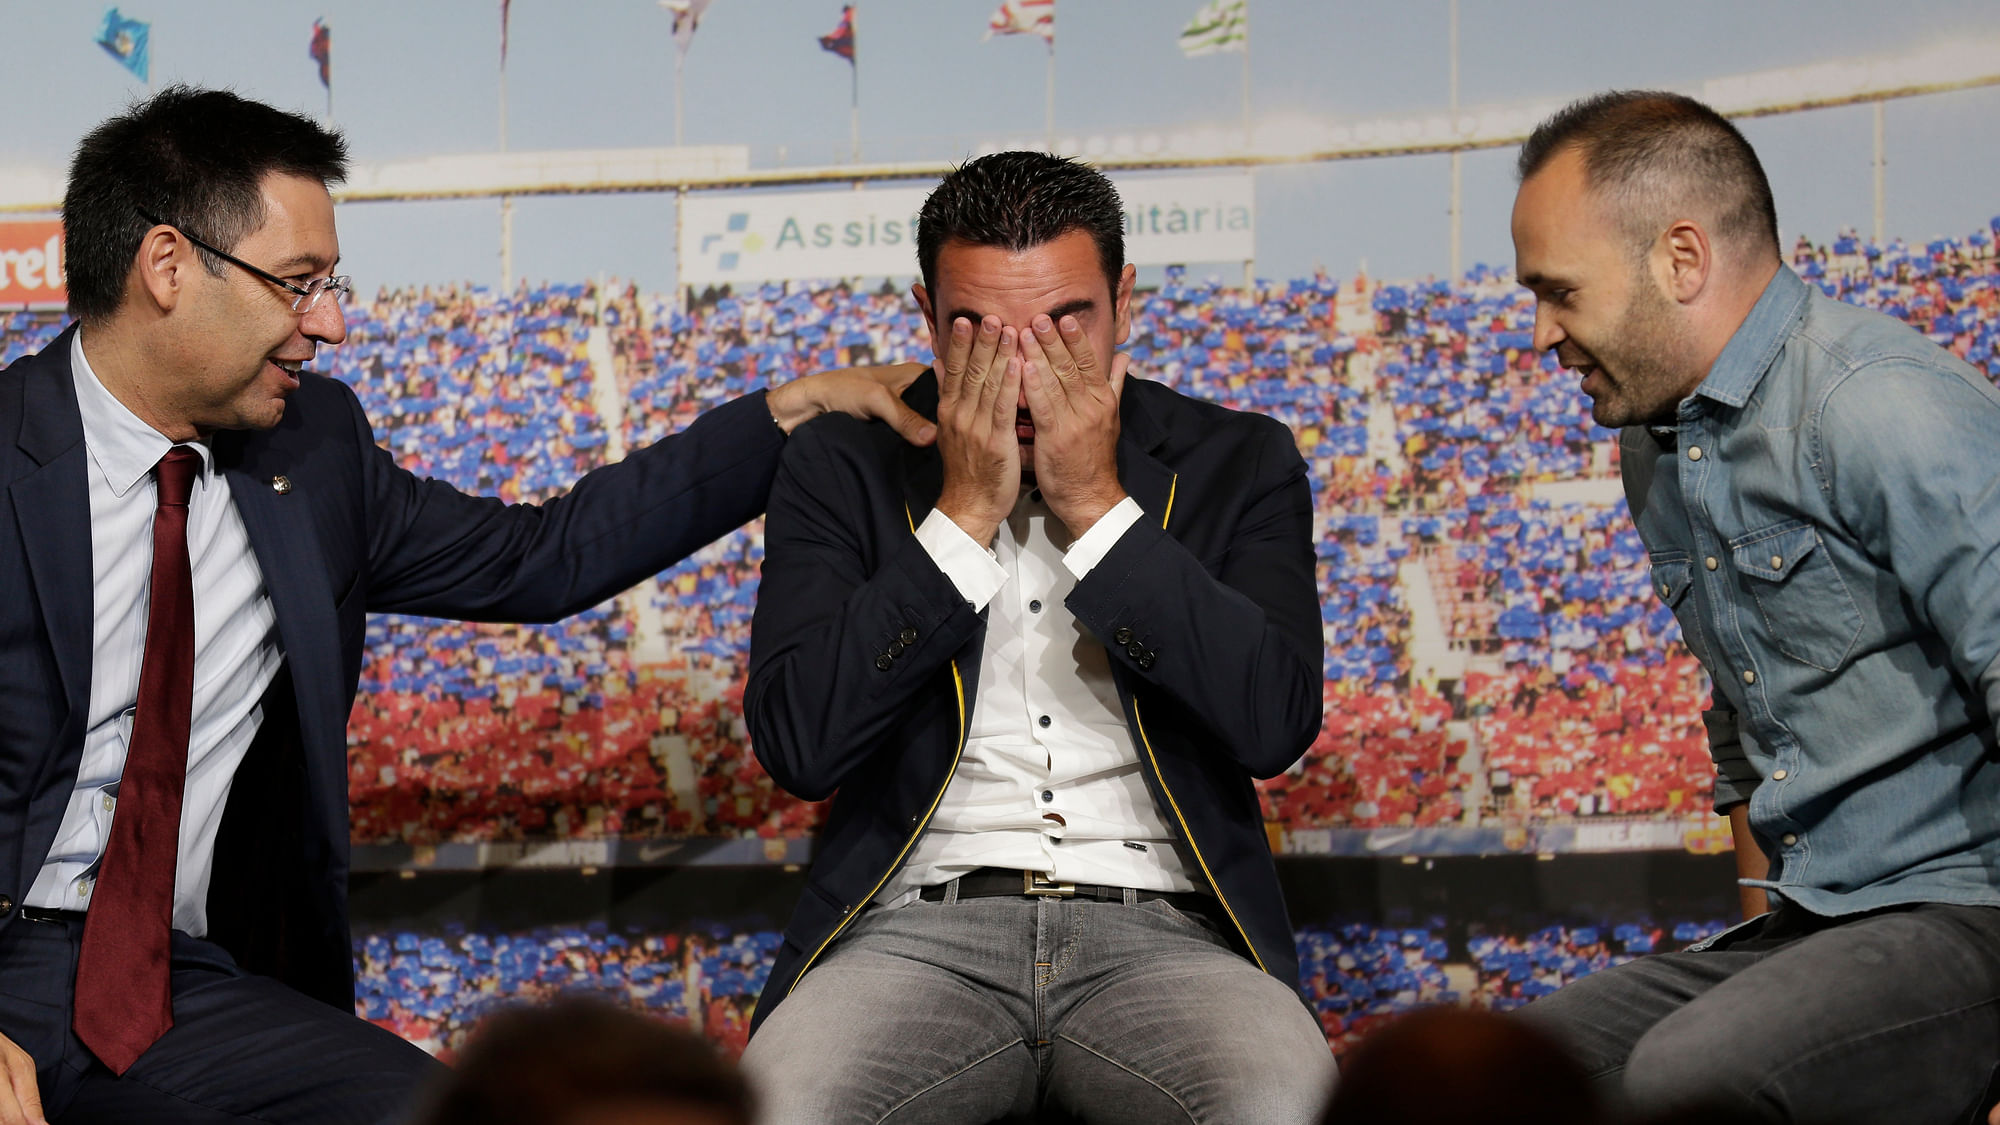 Xavi breaks down after delivering his farewell speech at the ceremony in&nbsp;Nou Camp. (Photo: AP)